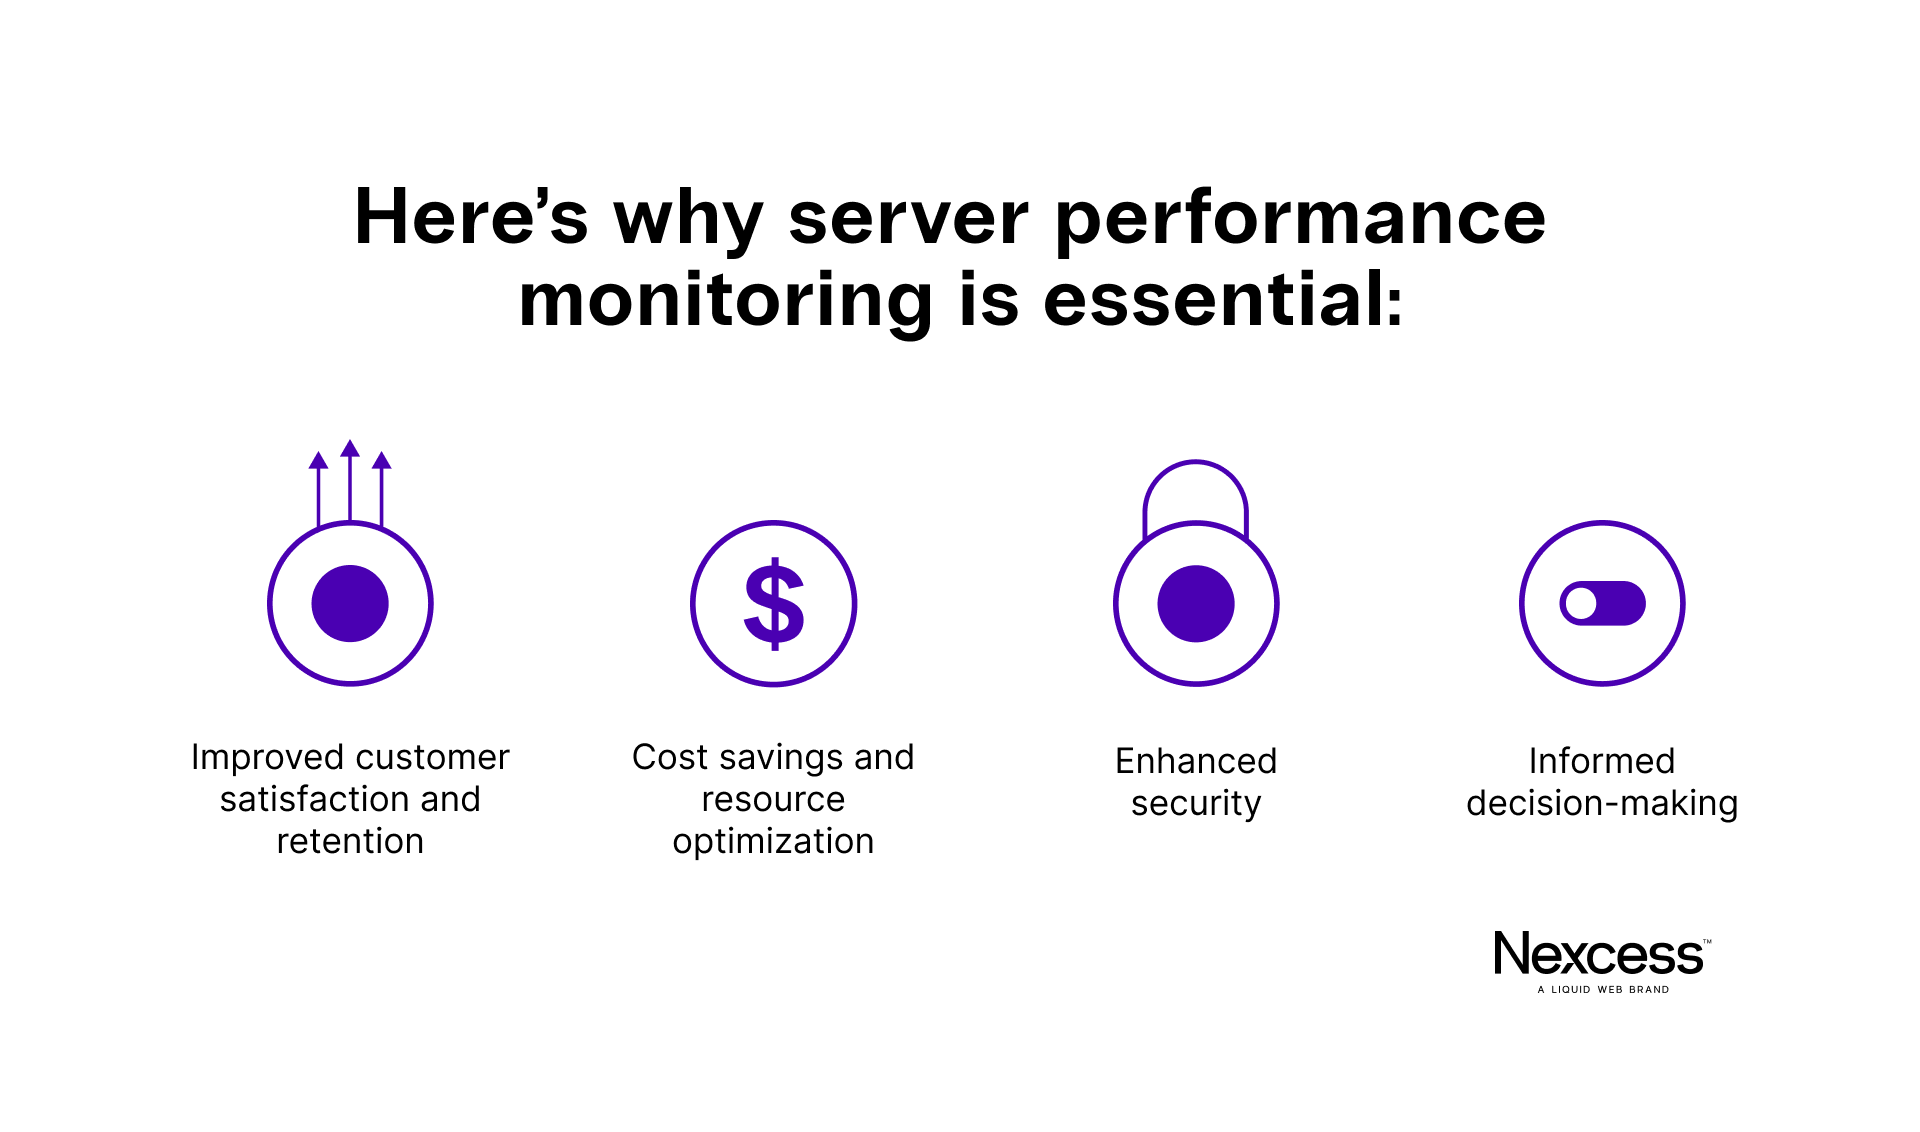 Four reasons server performance monitoring is important. 